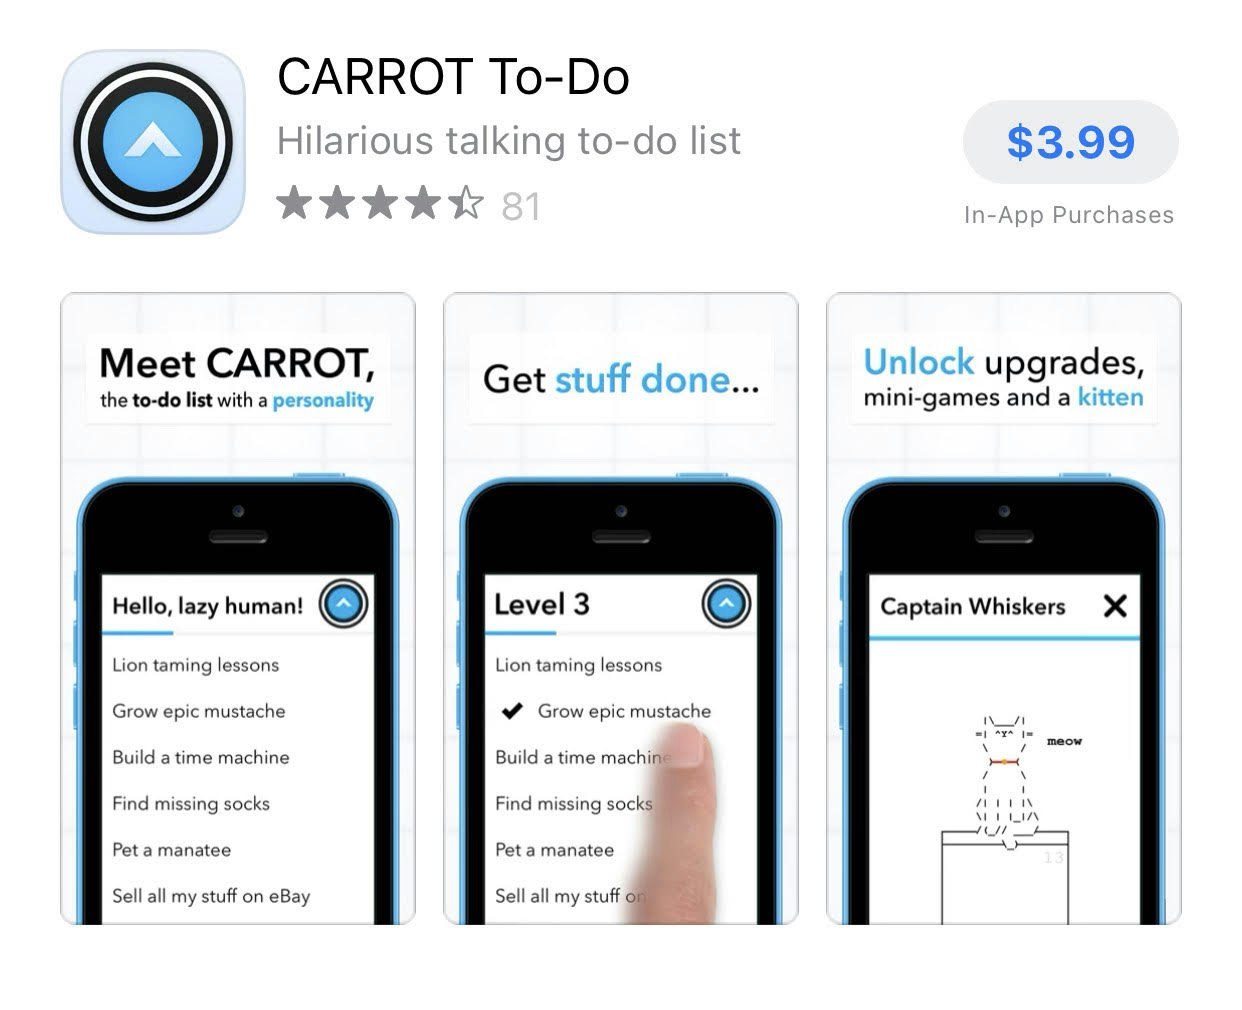 Carrot To-Do iPhone reminders